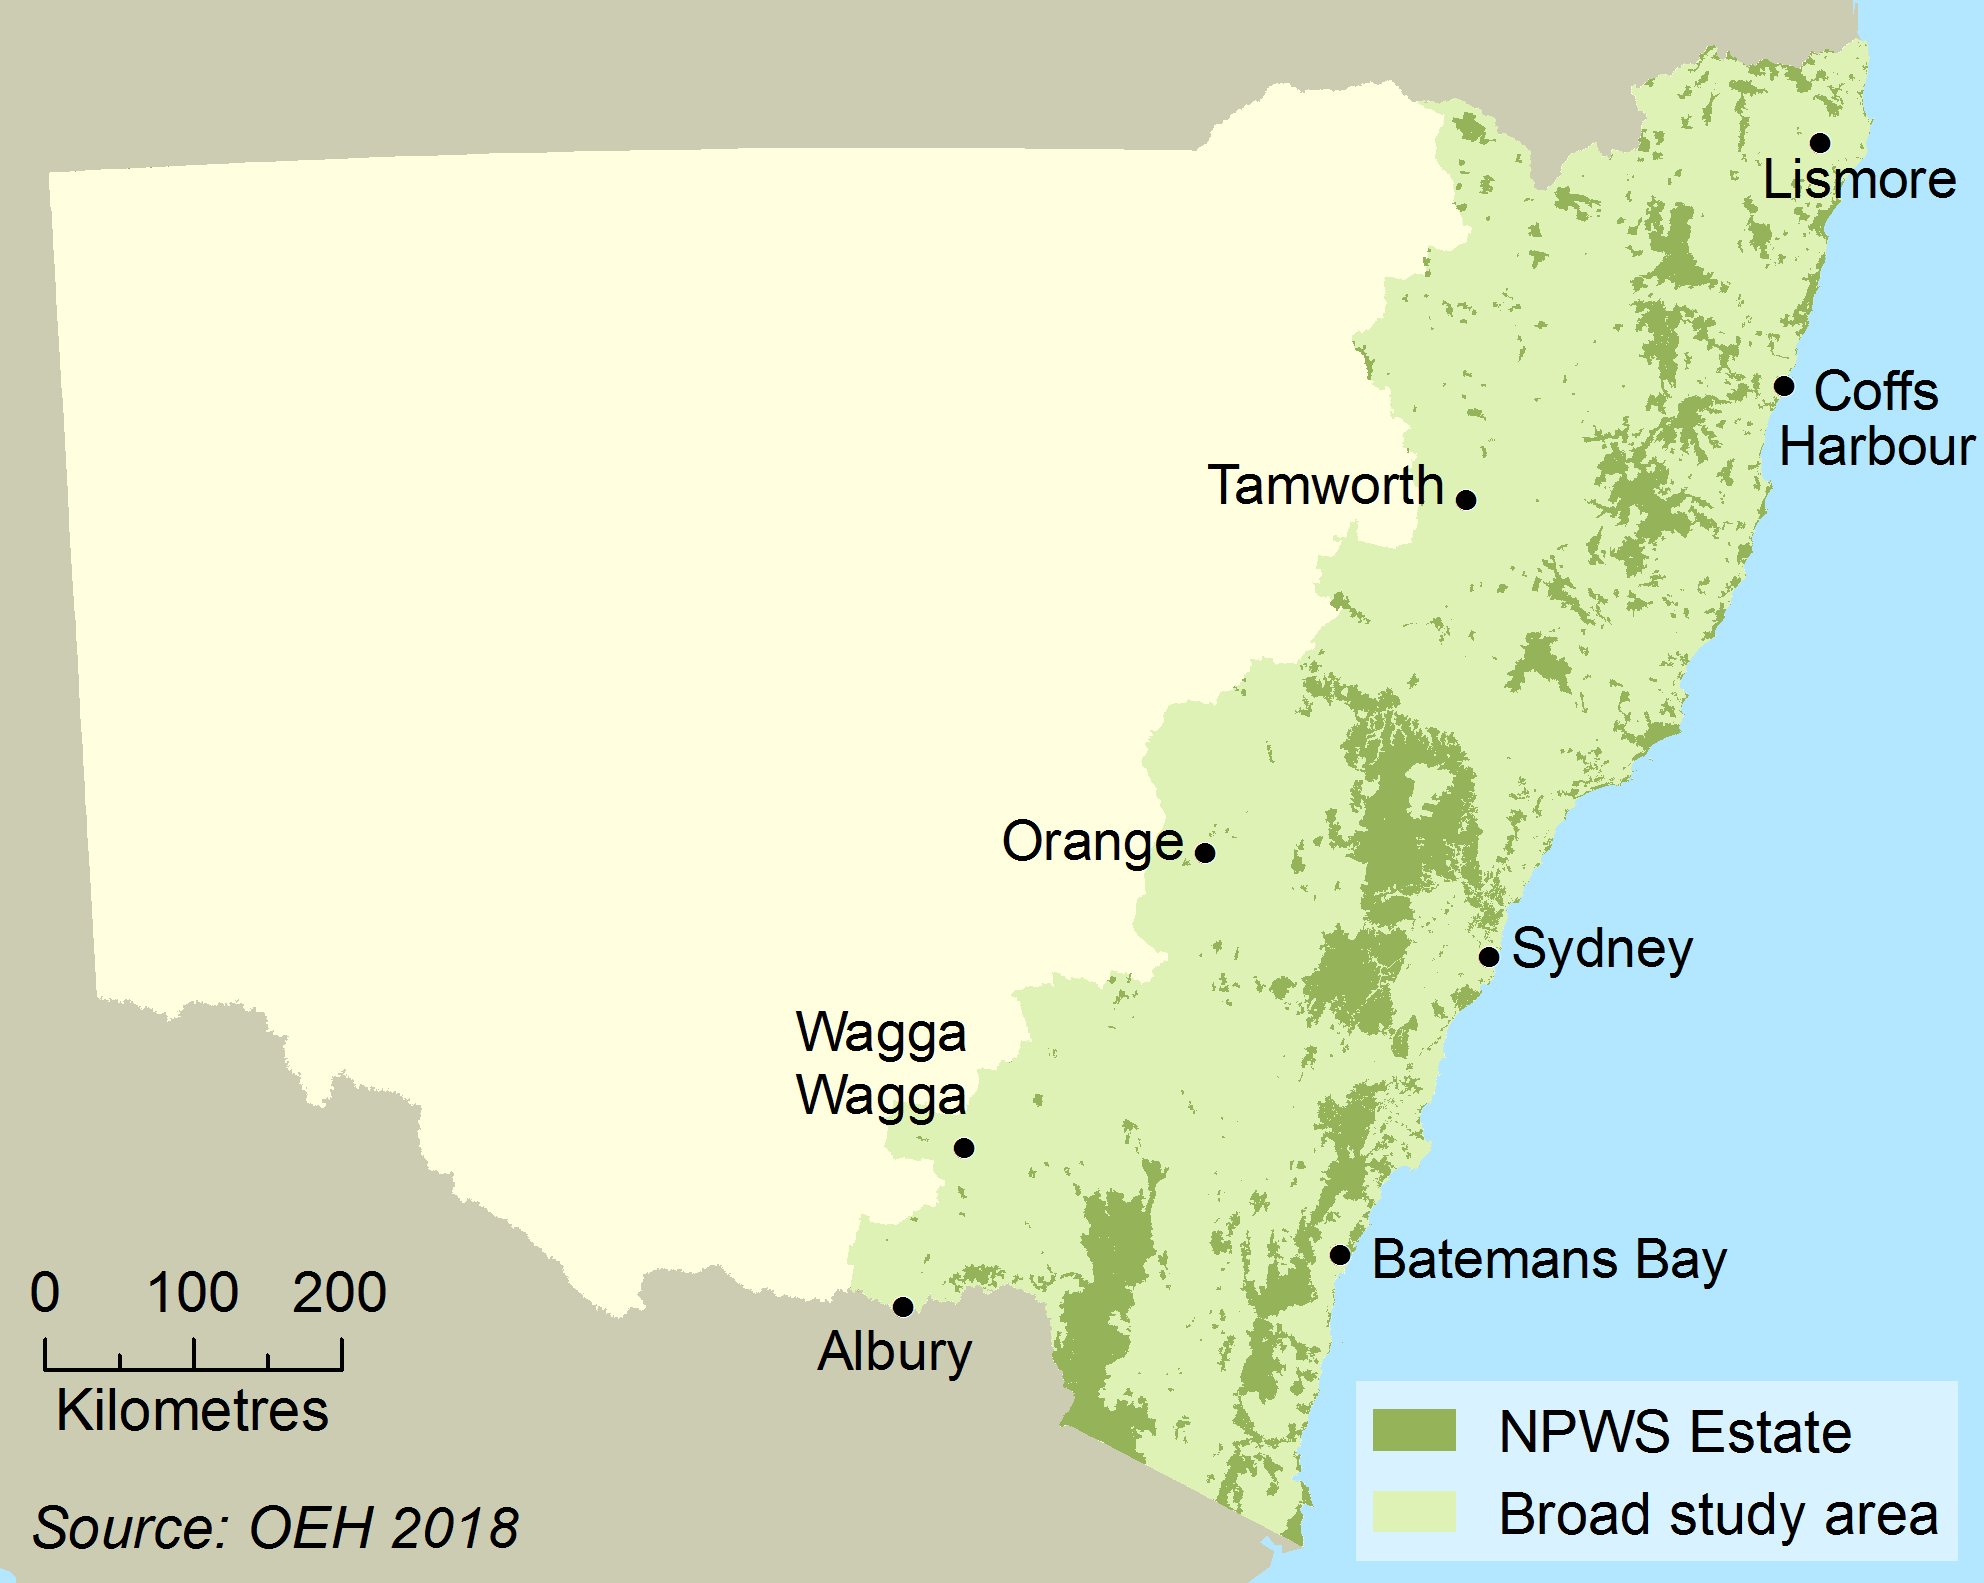 Map showing study area of WildCount program - NPWS reserves along the east coast of NSW